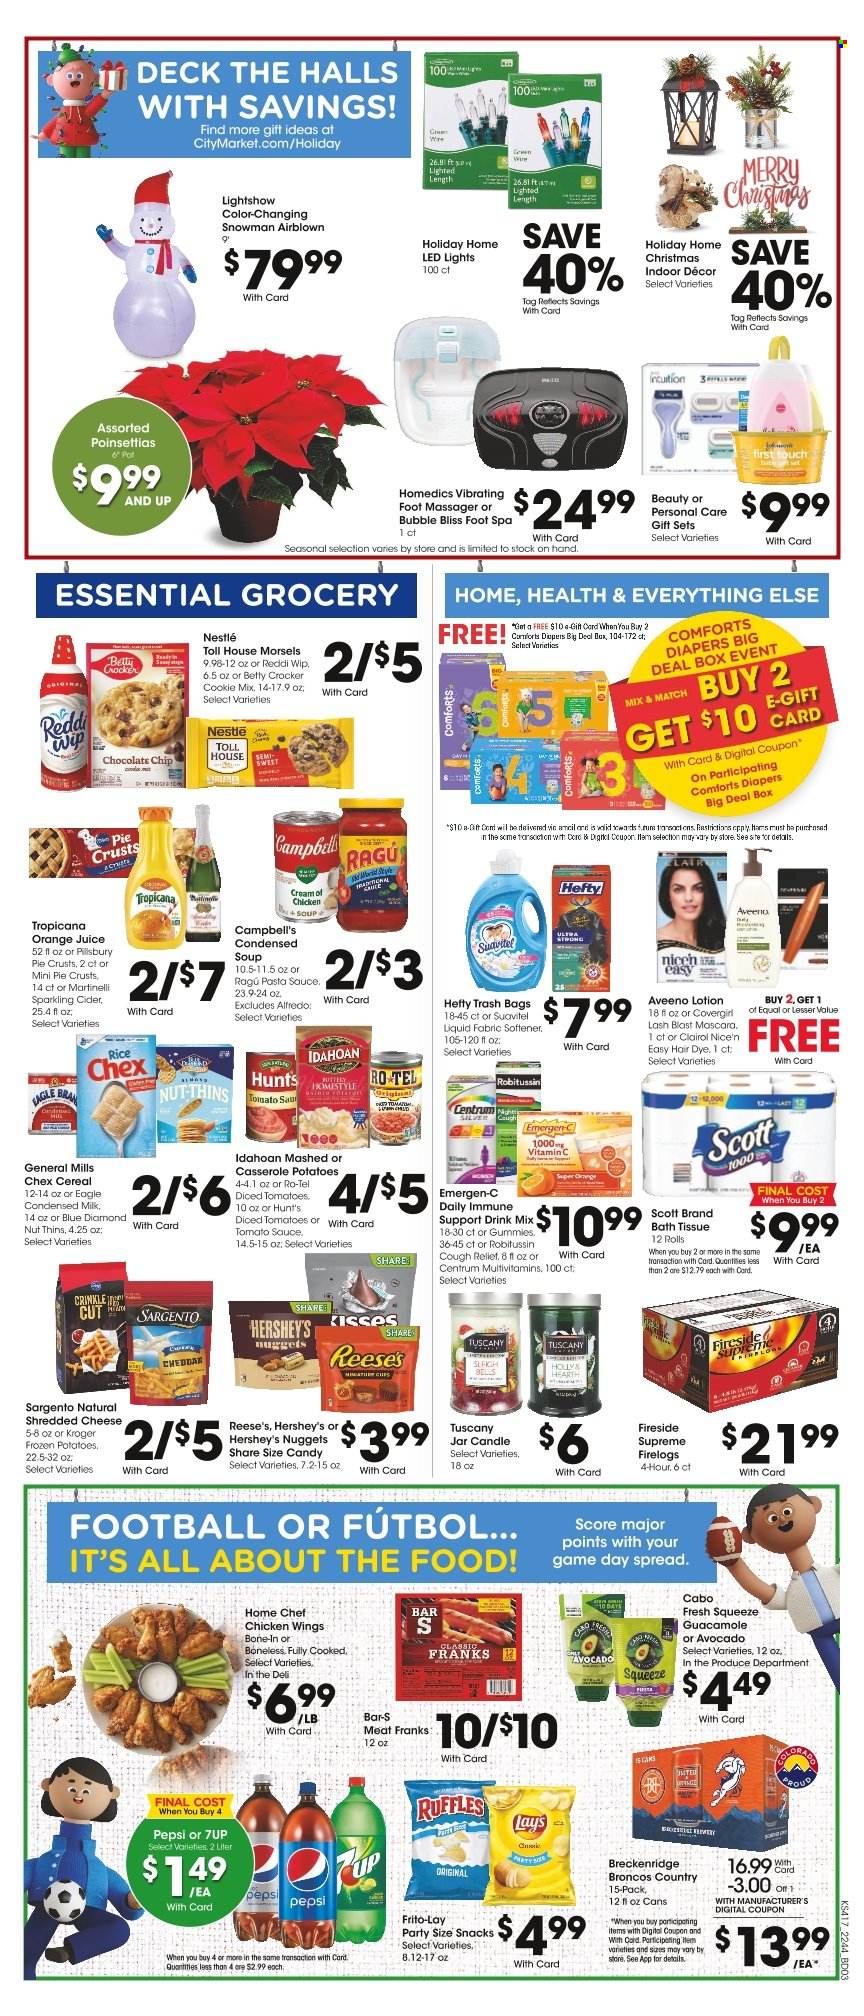 thumbnail - City Market Flyer - 11/30/2022 - 12/06/2022 - Sales products - pie, tomatoes, Campbell's, pasta sauce, condensed soup, soup, nuggets, Pillsbury, instant soup, ragú pasta, guacamole, shredded cheese, Sargento, milk, condensed milk, Reese's, Hershey's, chicken wings, Nestlé, Halls, chocolate chips, snack, Lay’s, Thins, Frito-Lay, Ruffles, pie crust, tomato sauce, diced tomatoes, cereals, rice, ragu, Blue Diamond, Pepsi, orange juice, juice, 7UP, sparkling cider, sparkling wine, cider, nappies, Aveeno, bath tissue, Scott, fabric softener, Clairol, body lotion, Hefty, trash bags, mascara, pot, casserole, candle, LED light, poinsettia, multivitamin, Robitussin, Emergen-C, Centrum. Page 6.